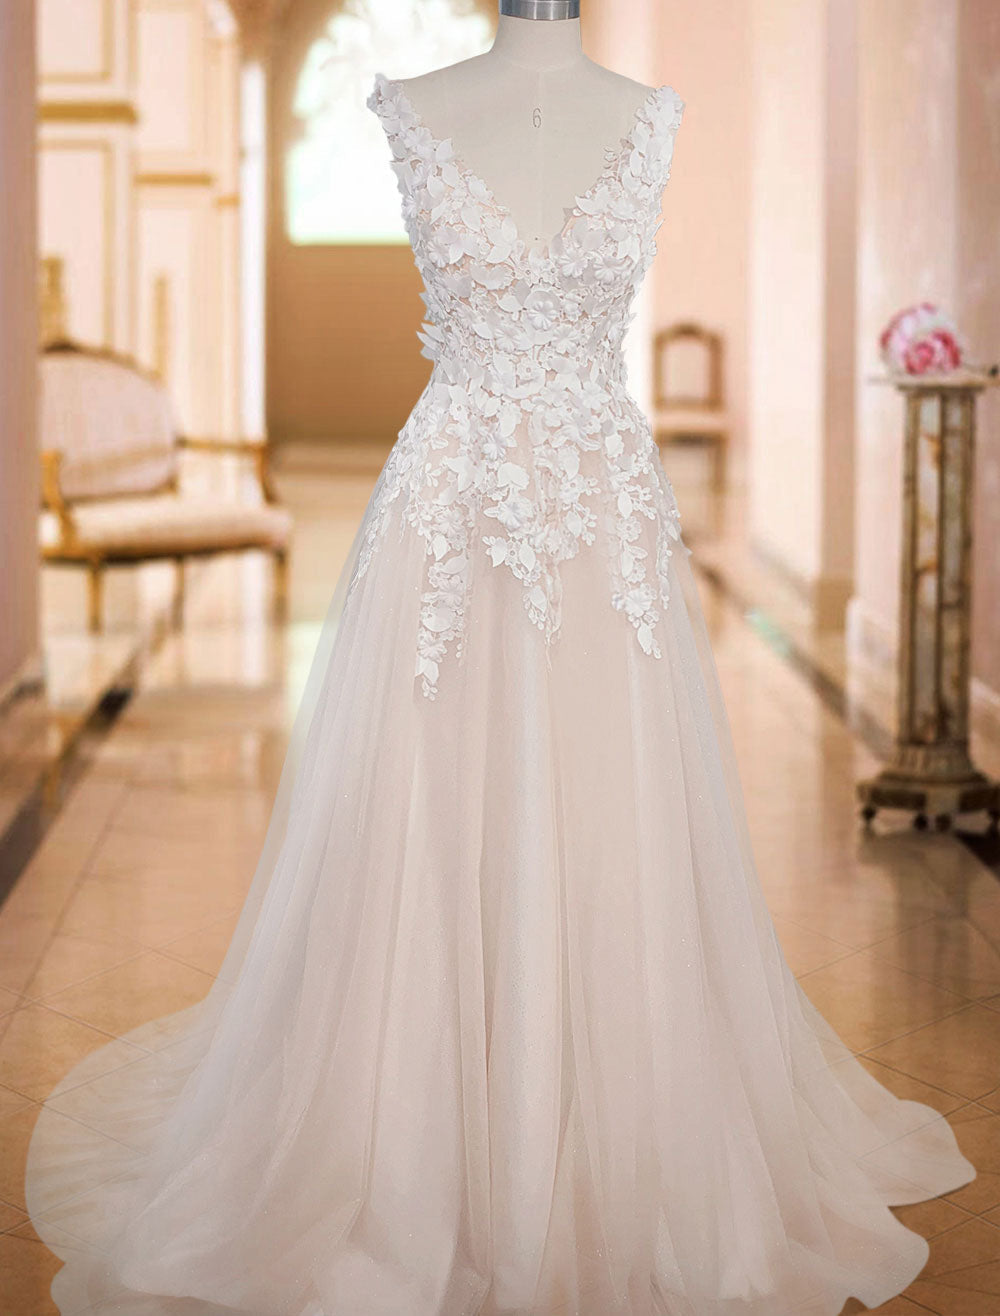 Designer bridal gowns in stock from around the globe. up to size 28W Rylee  Bridal Elegance | Erie PA